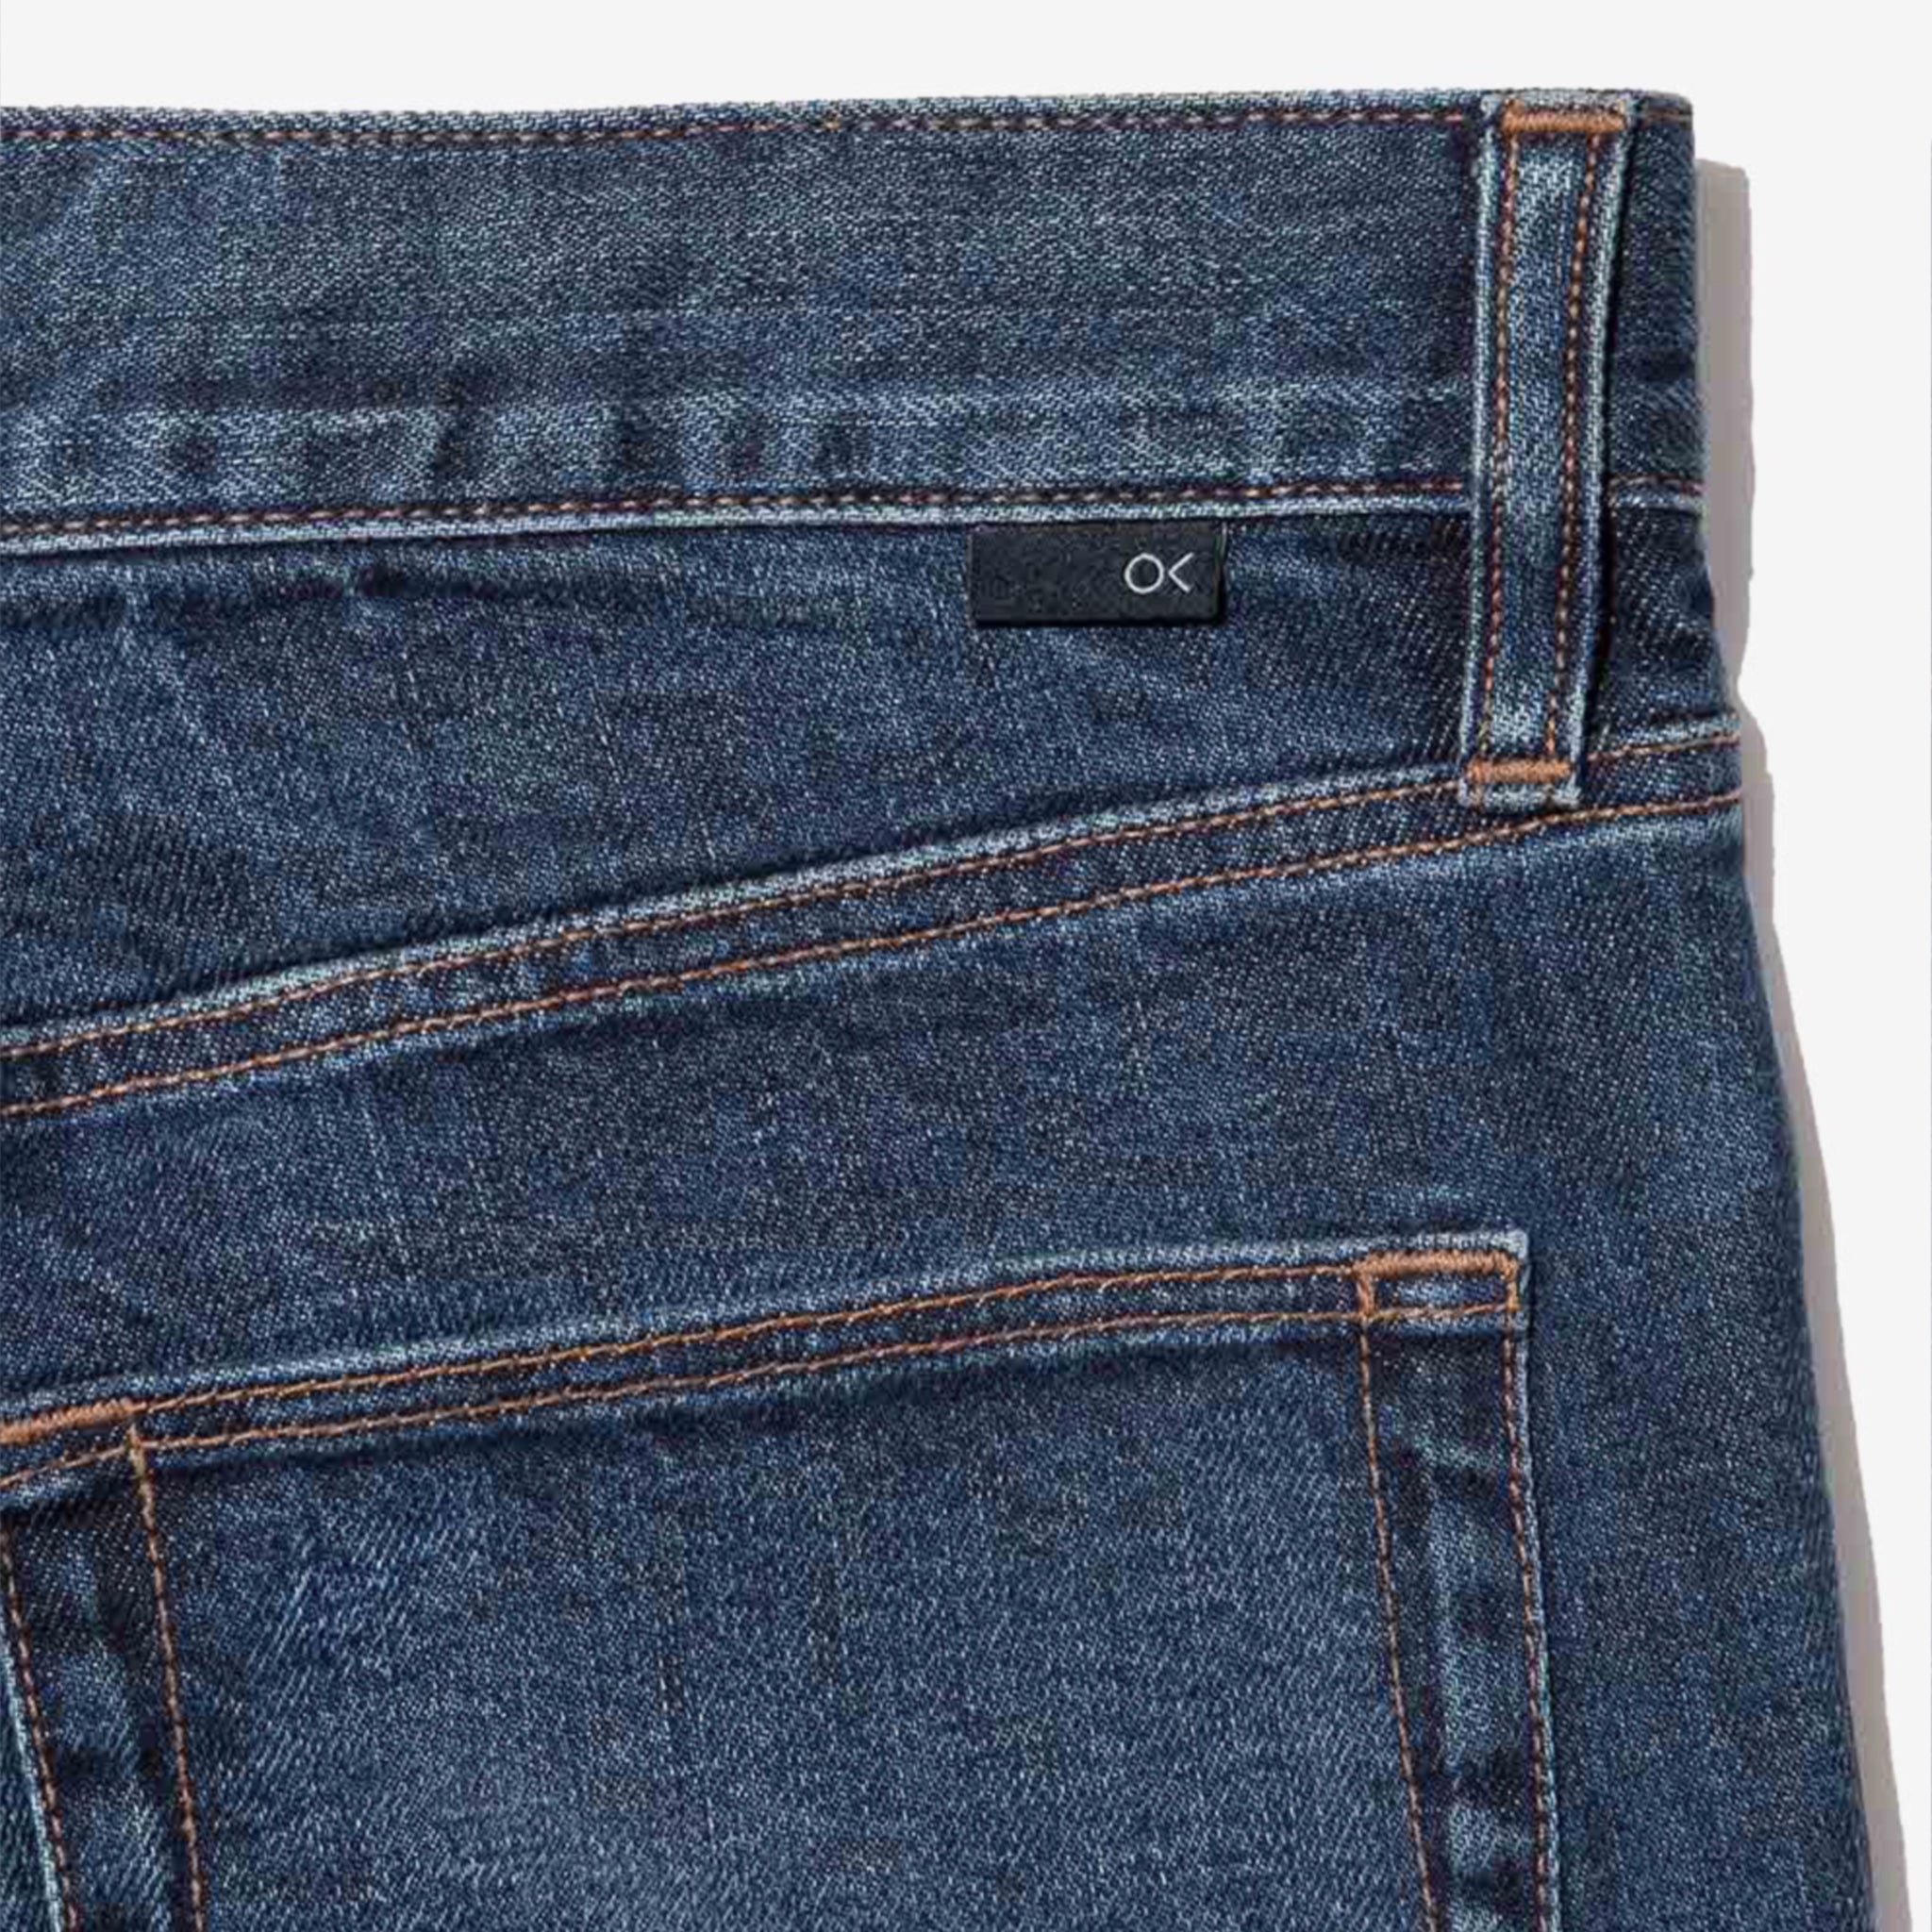 Outerknown Ambassador Slim Fit Jeans - Faded Indigo